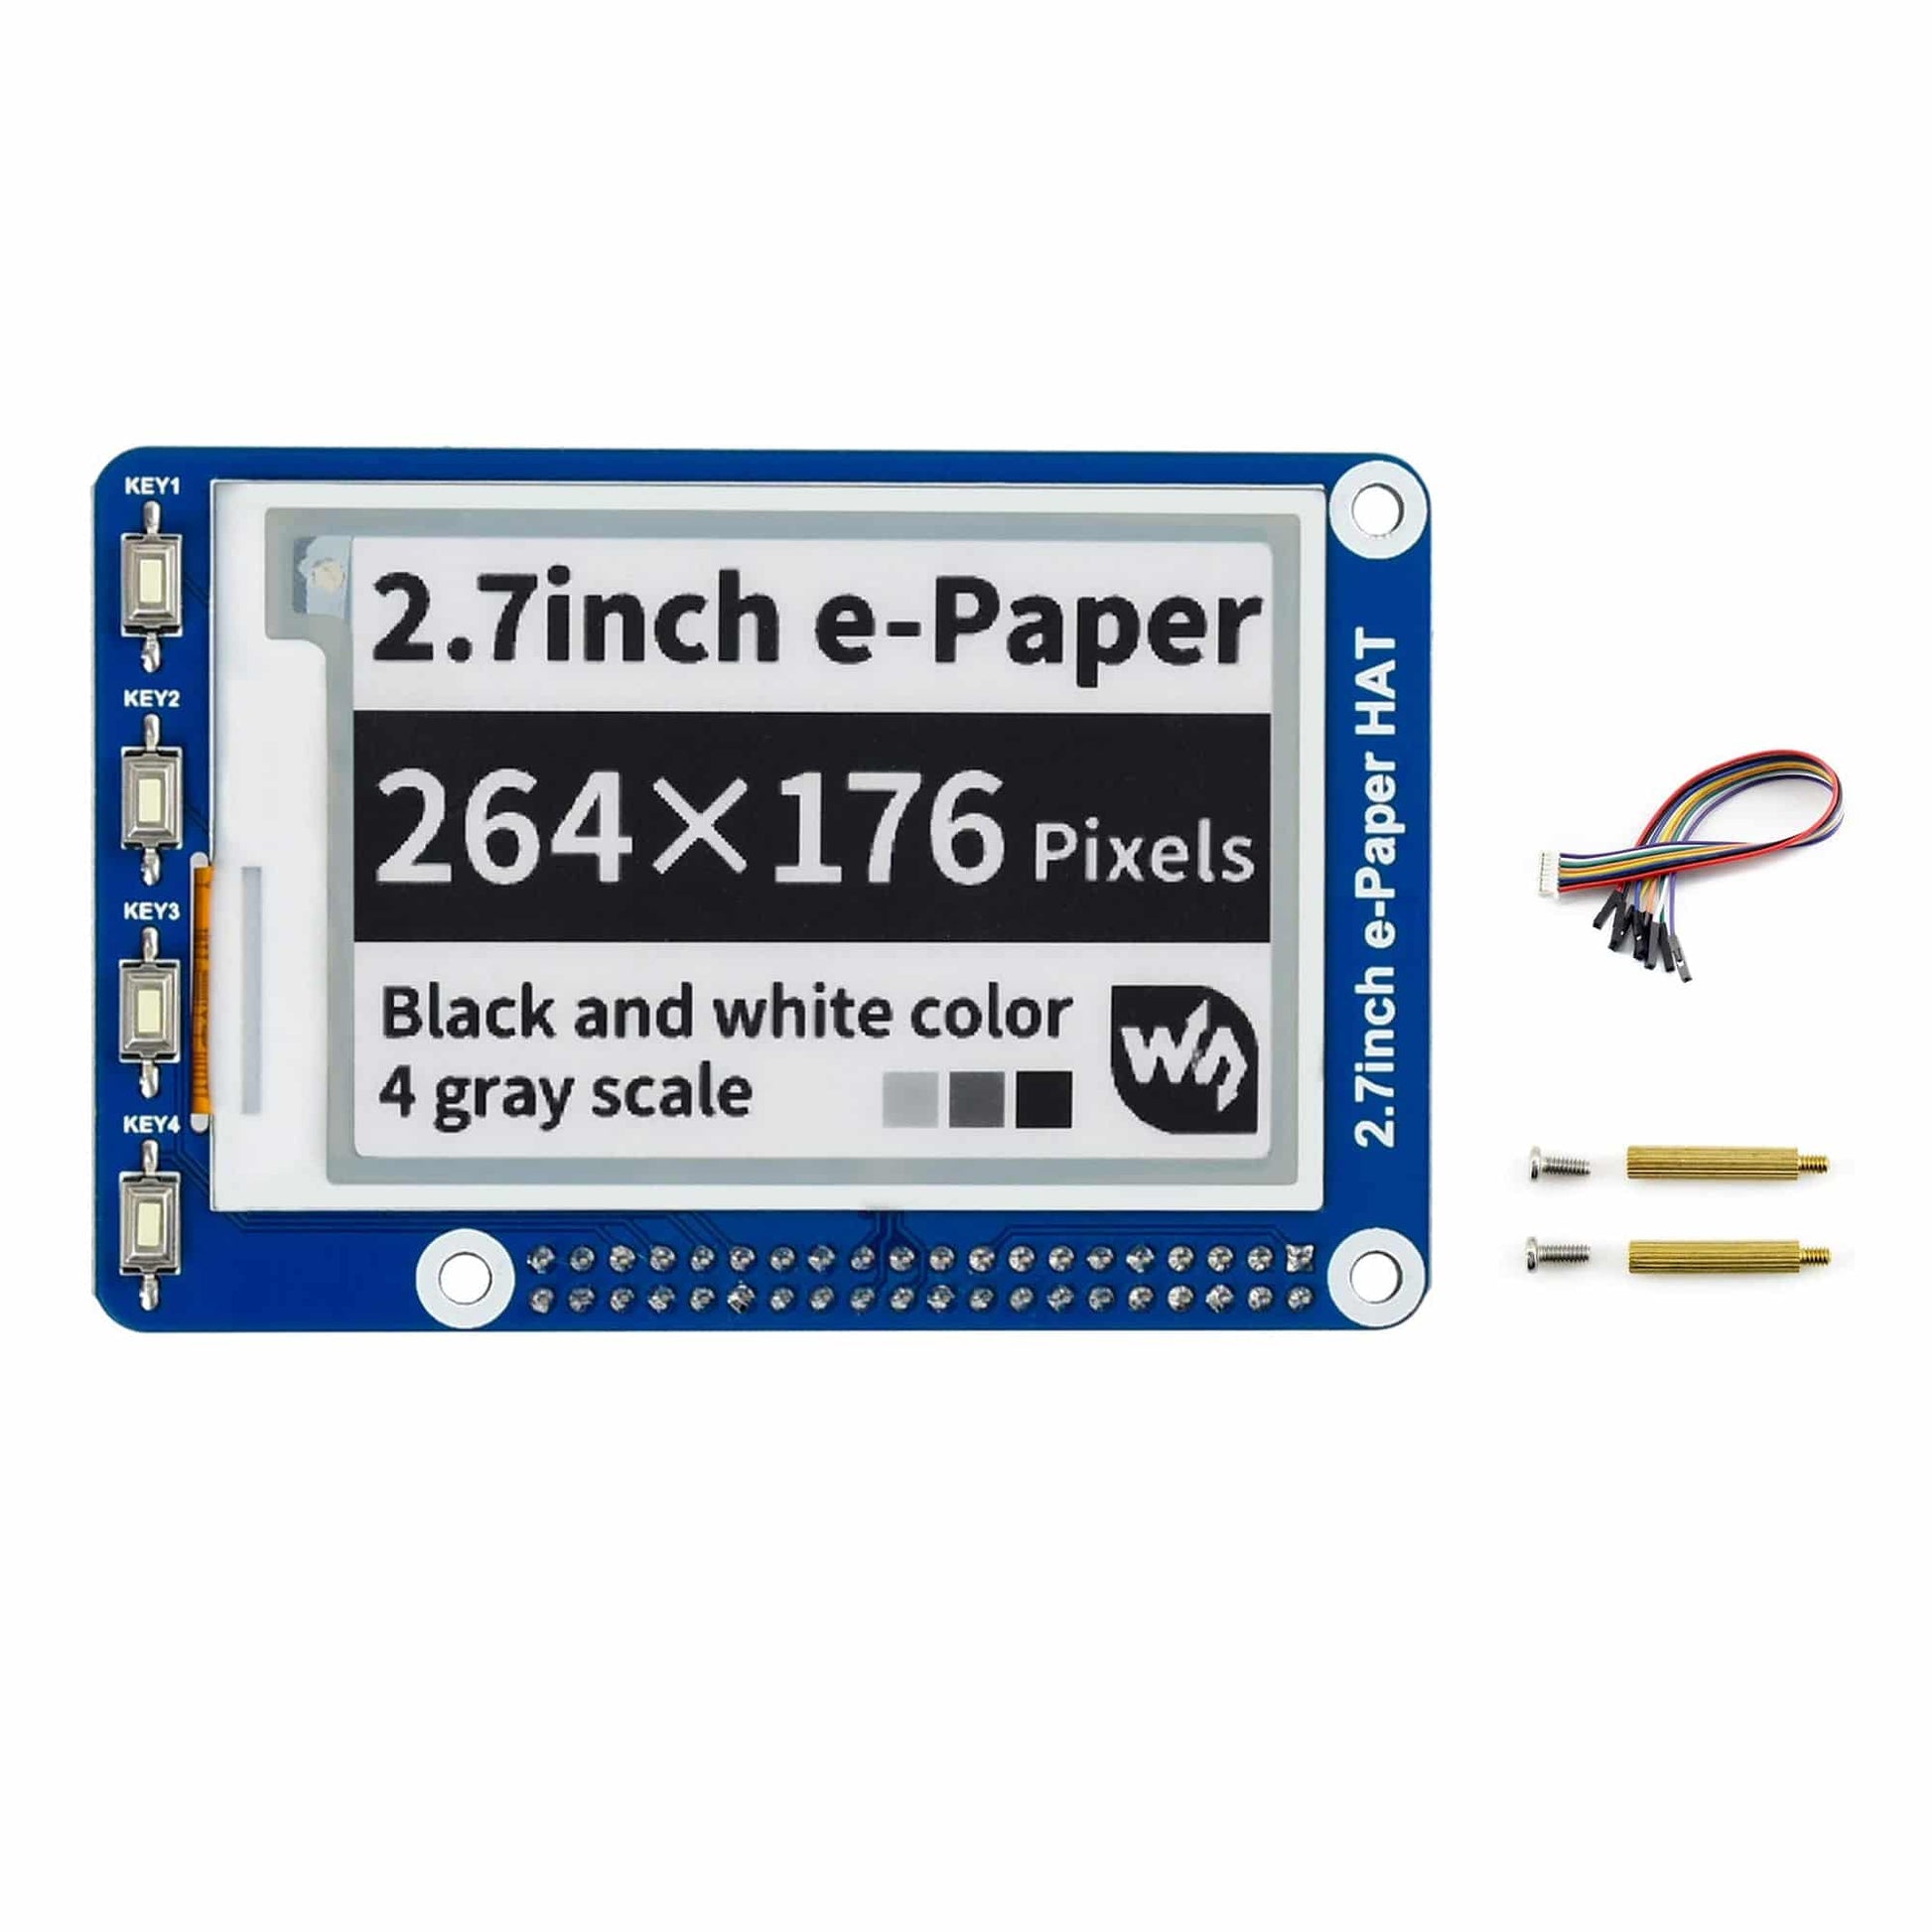 Waveshare 2.7inch E-Ink Display HAT Compatible with Pi